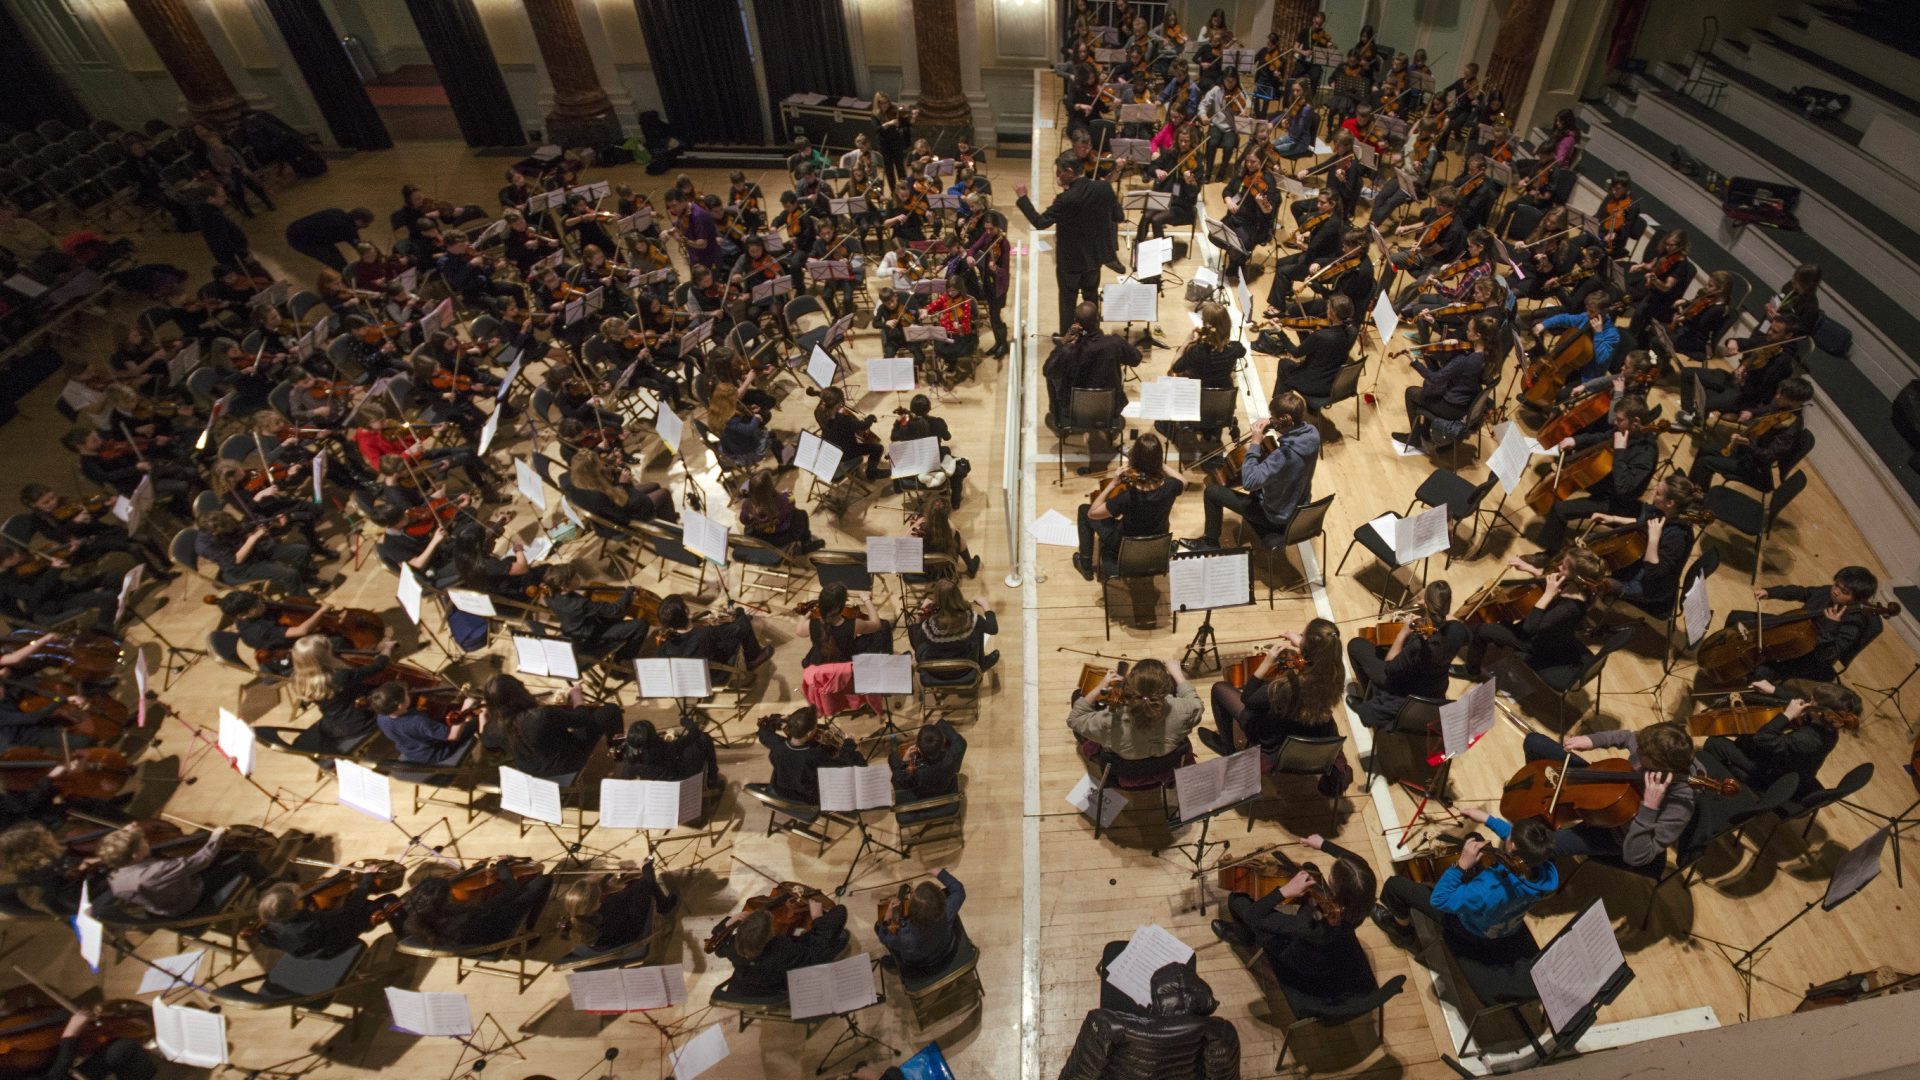 Large orchestra ensemble, as featured in our audience resources